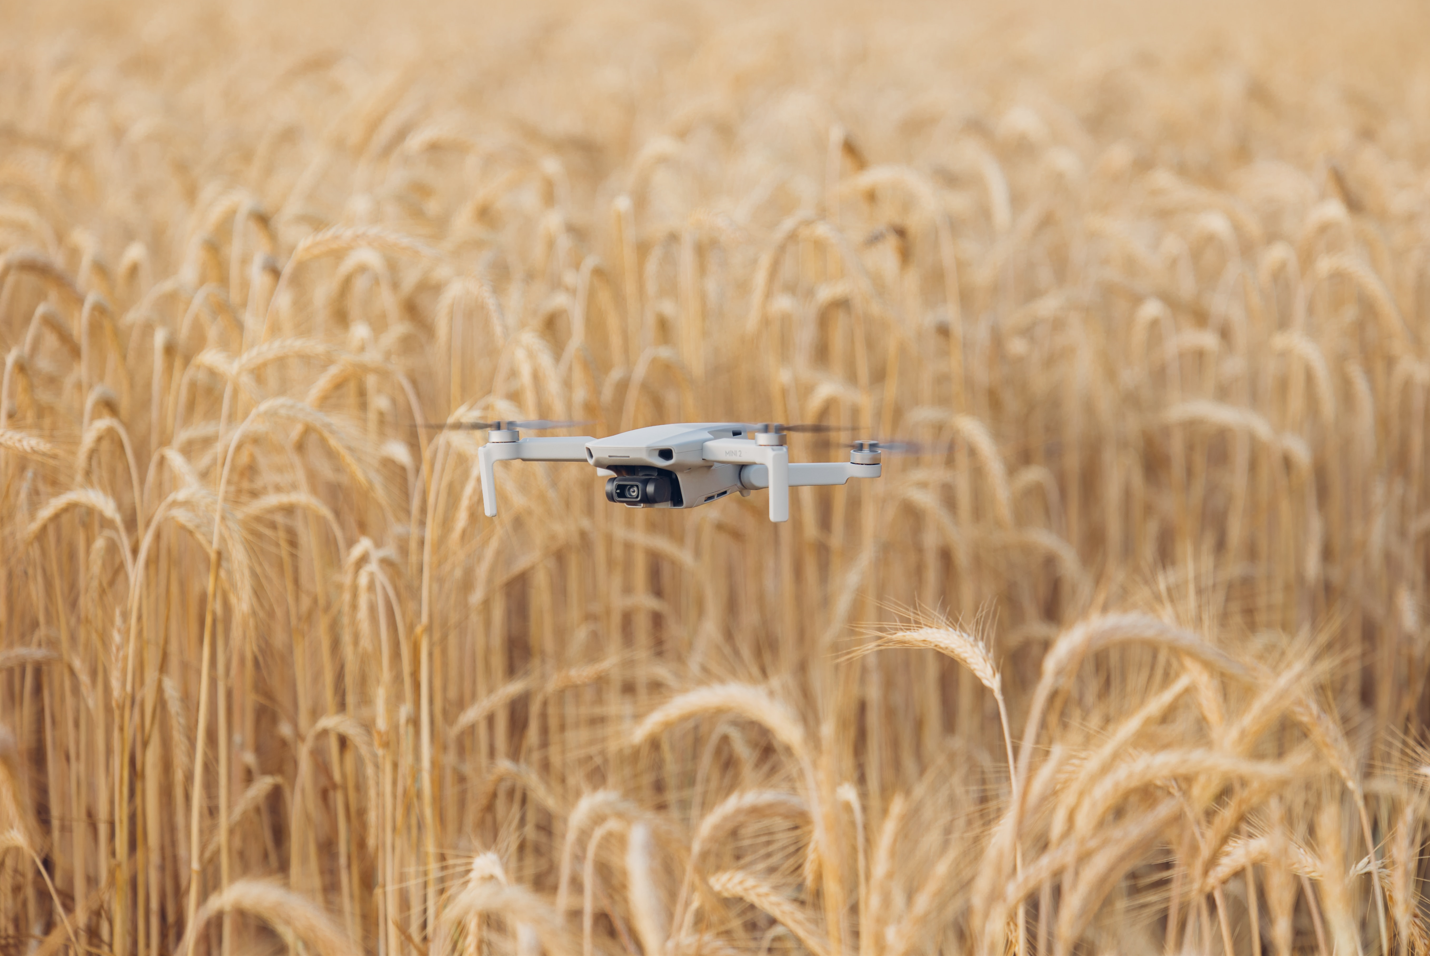 Drone In Agriculture